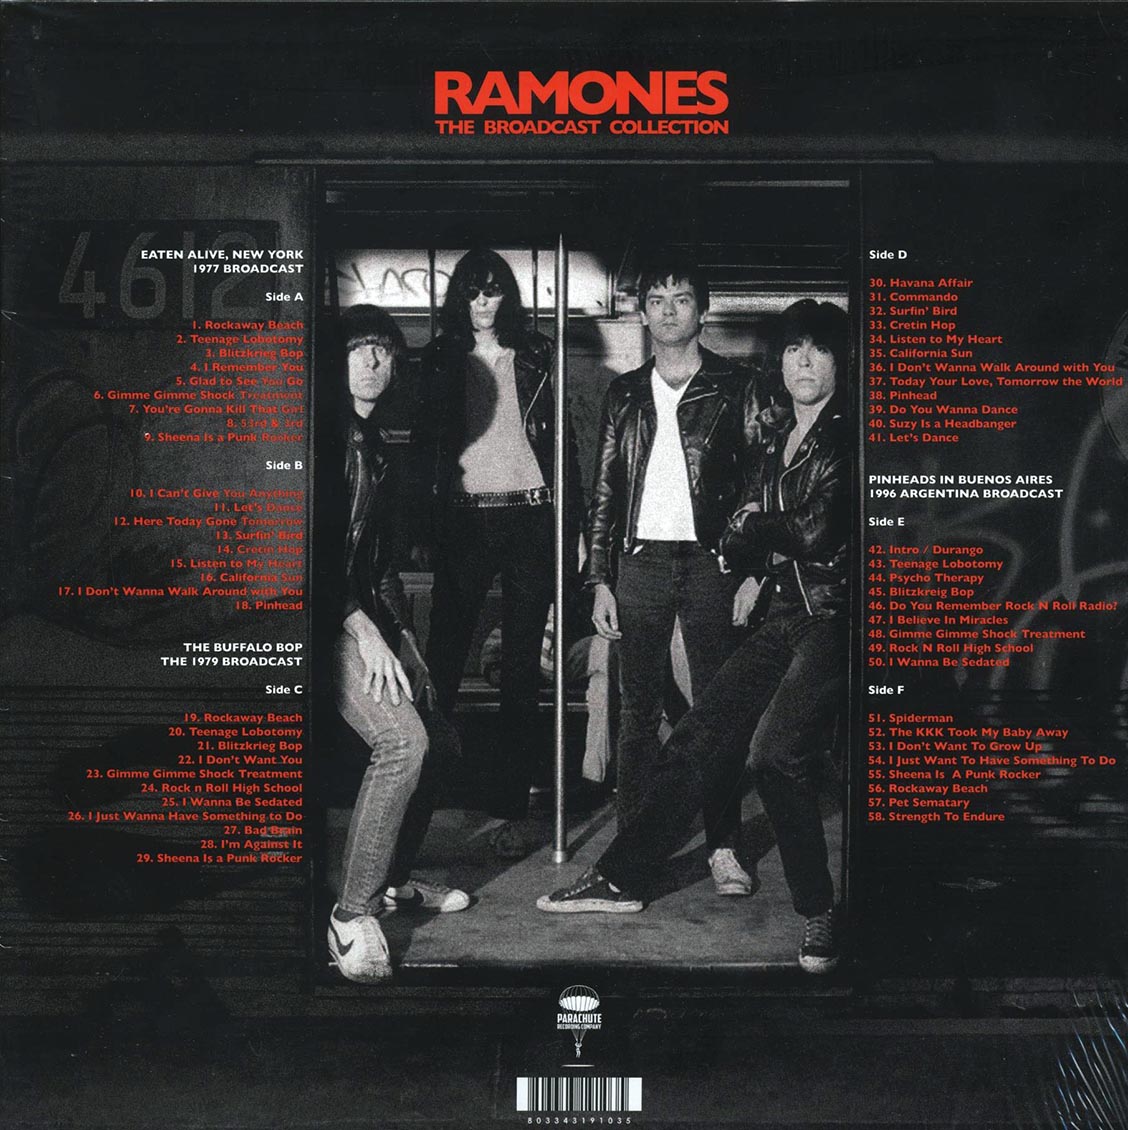 The Ramones - The Broadcast Collection